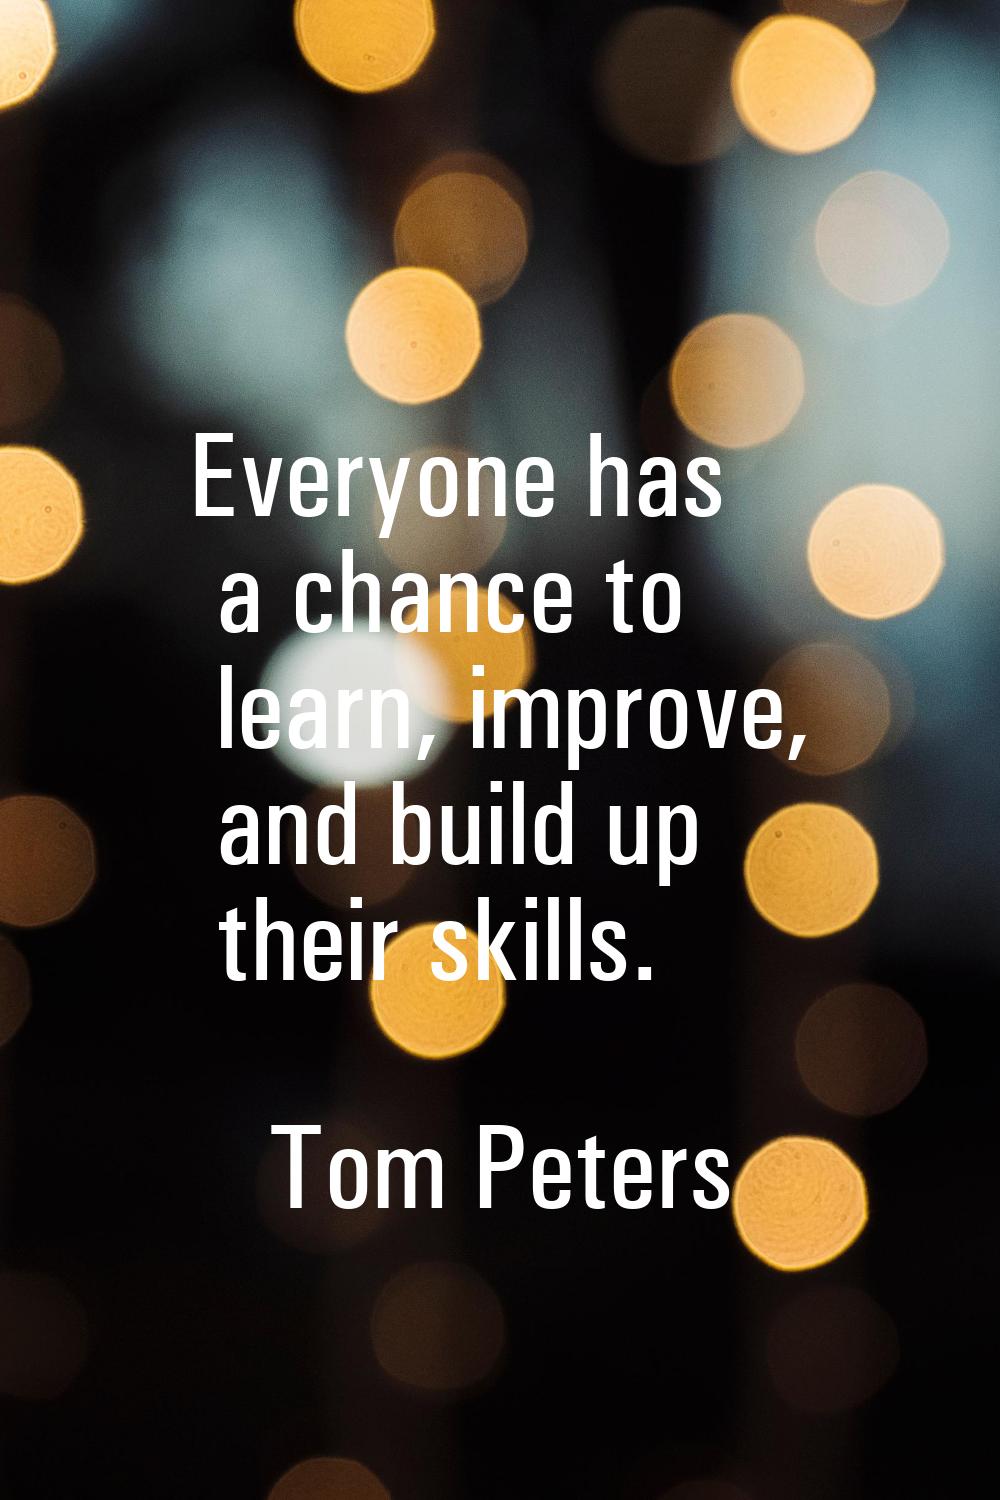 Everyone has a chance to learn, improve, and build up their skills.